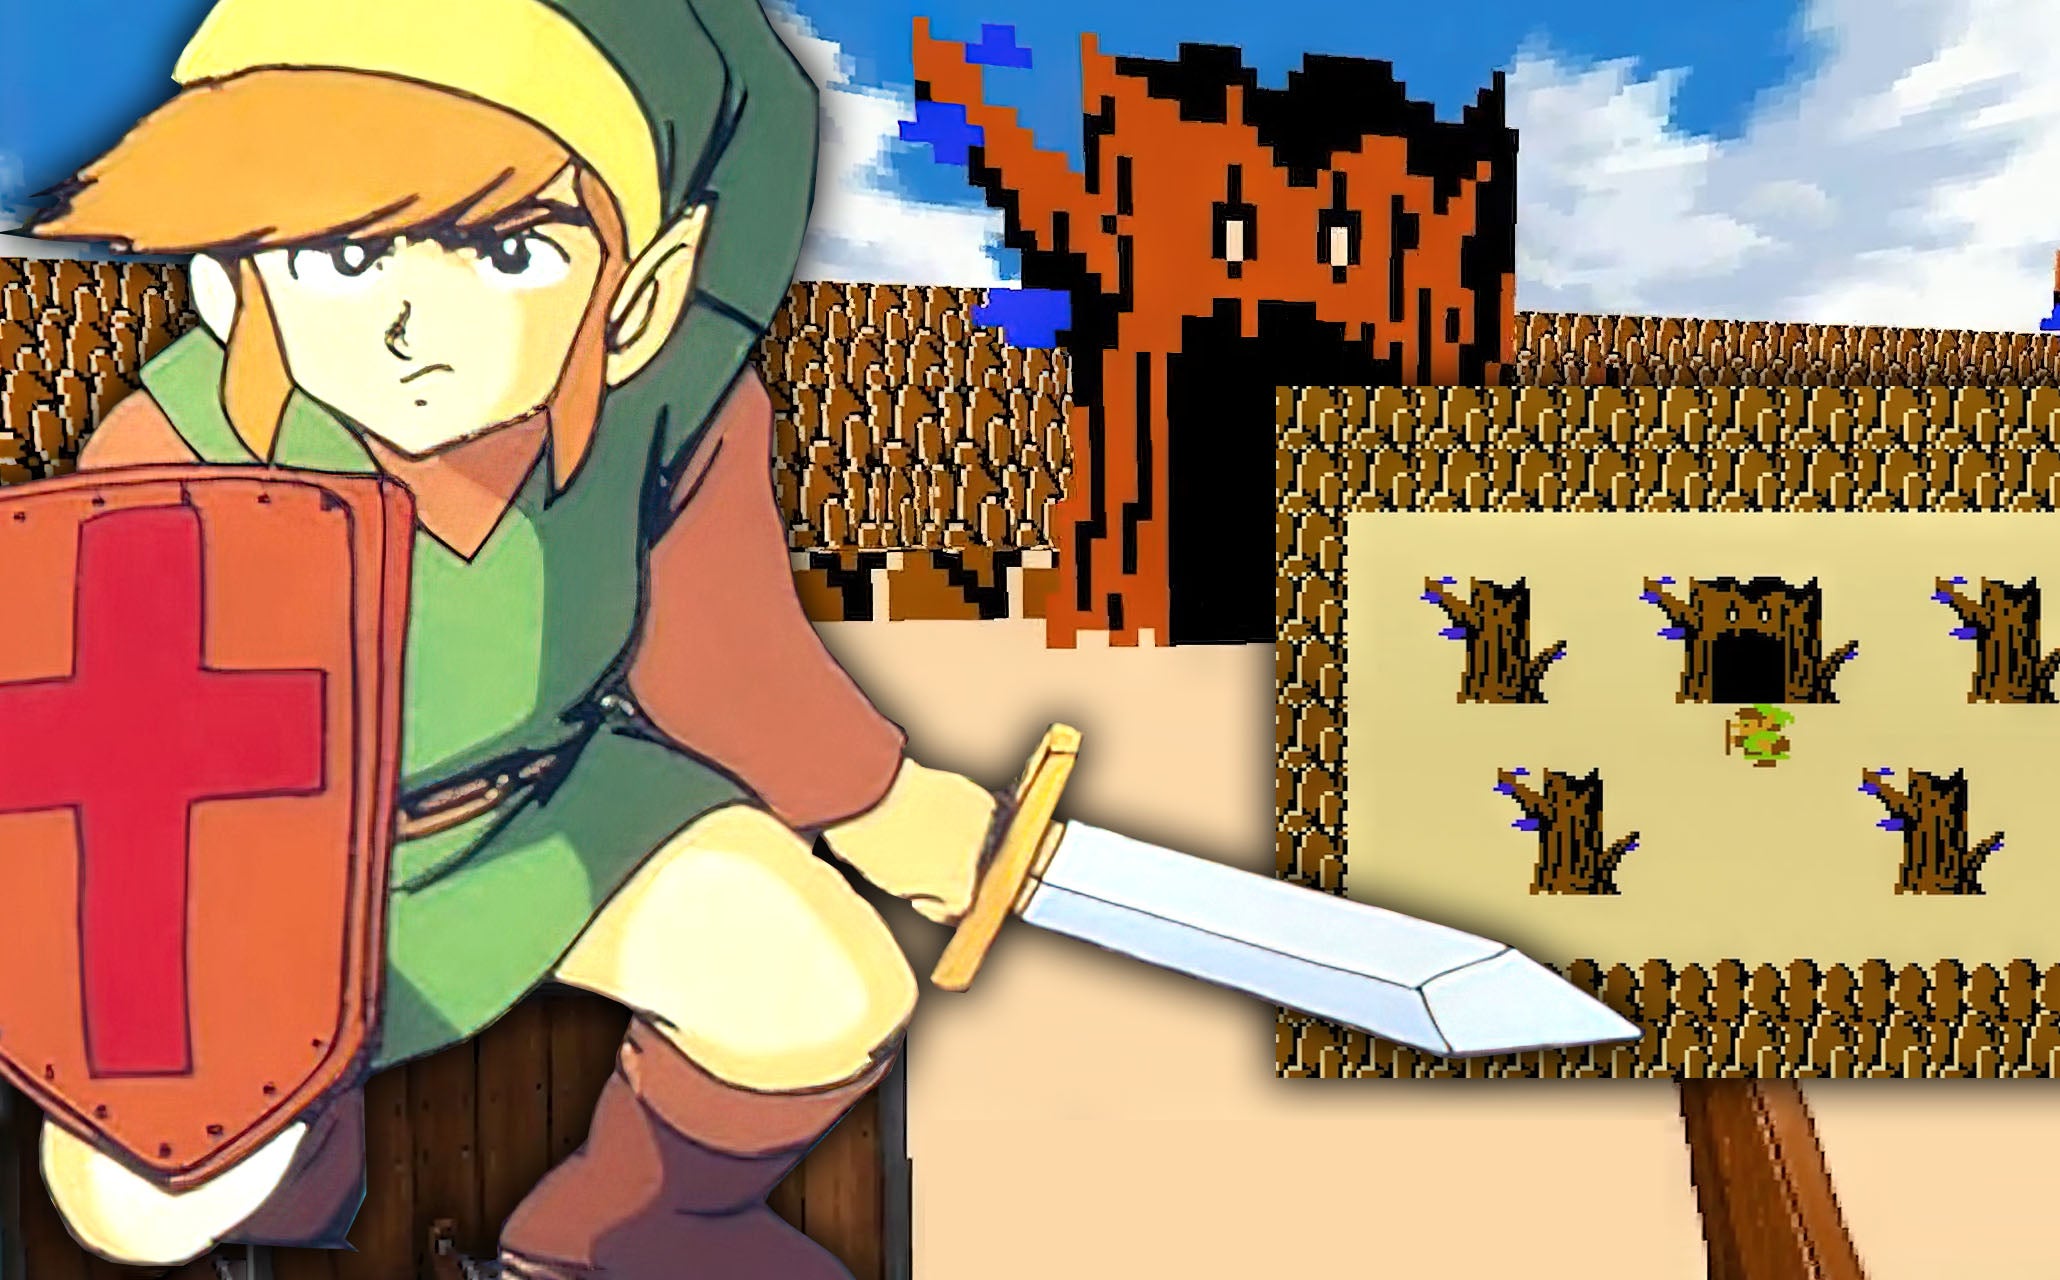 the legend of doom: an innovative mod that brings the NES version of Hyrule to classic Doom.